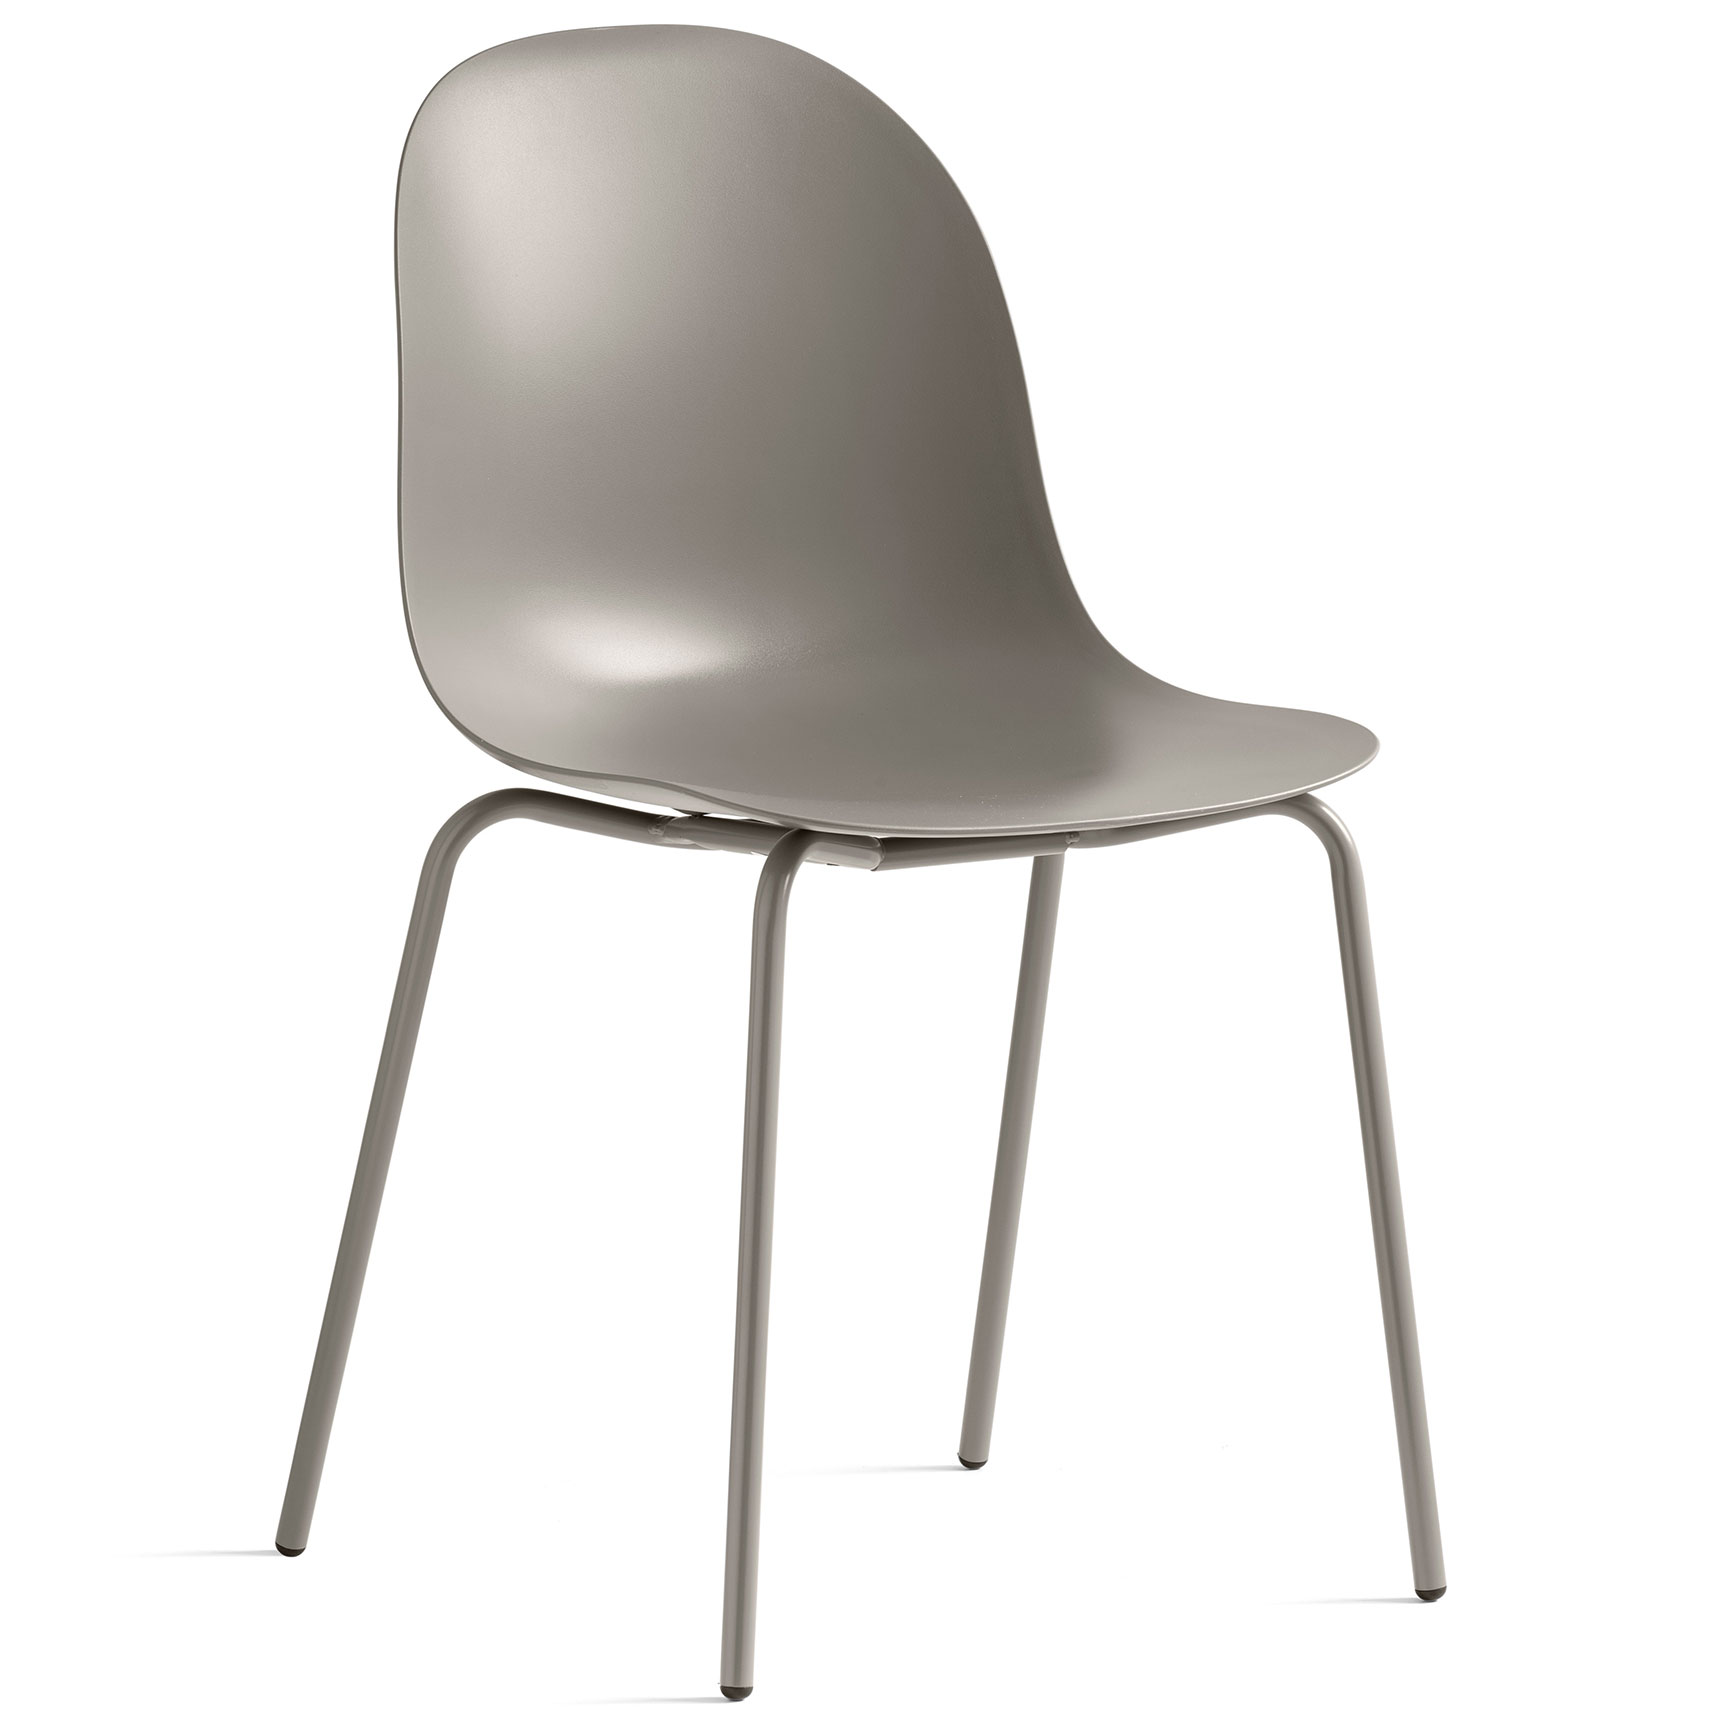 | CON1185139 Chair by CB166300017690000000000 | Academy Connubia